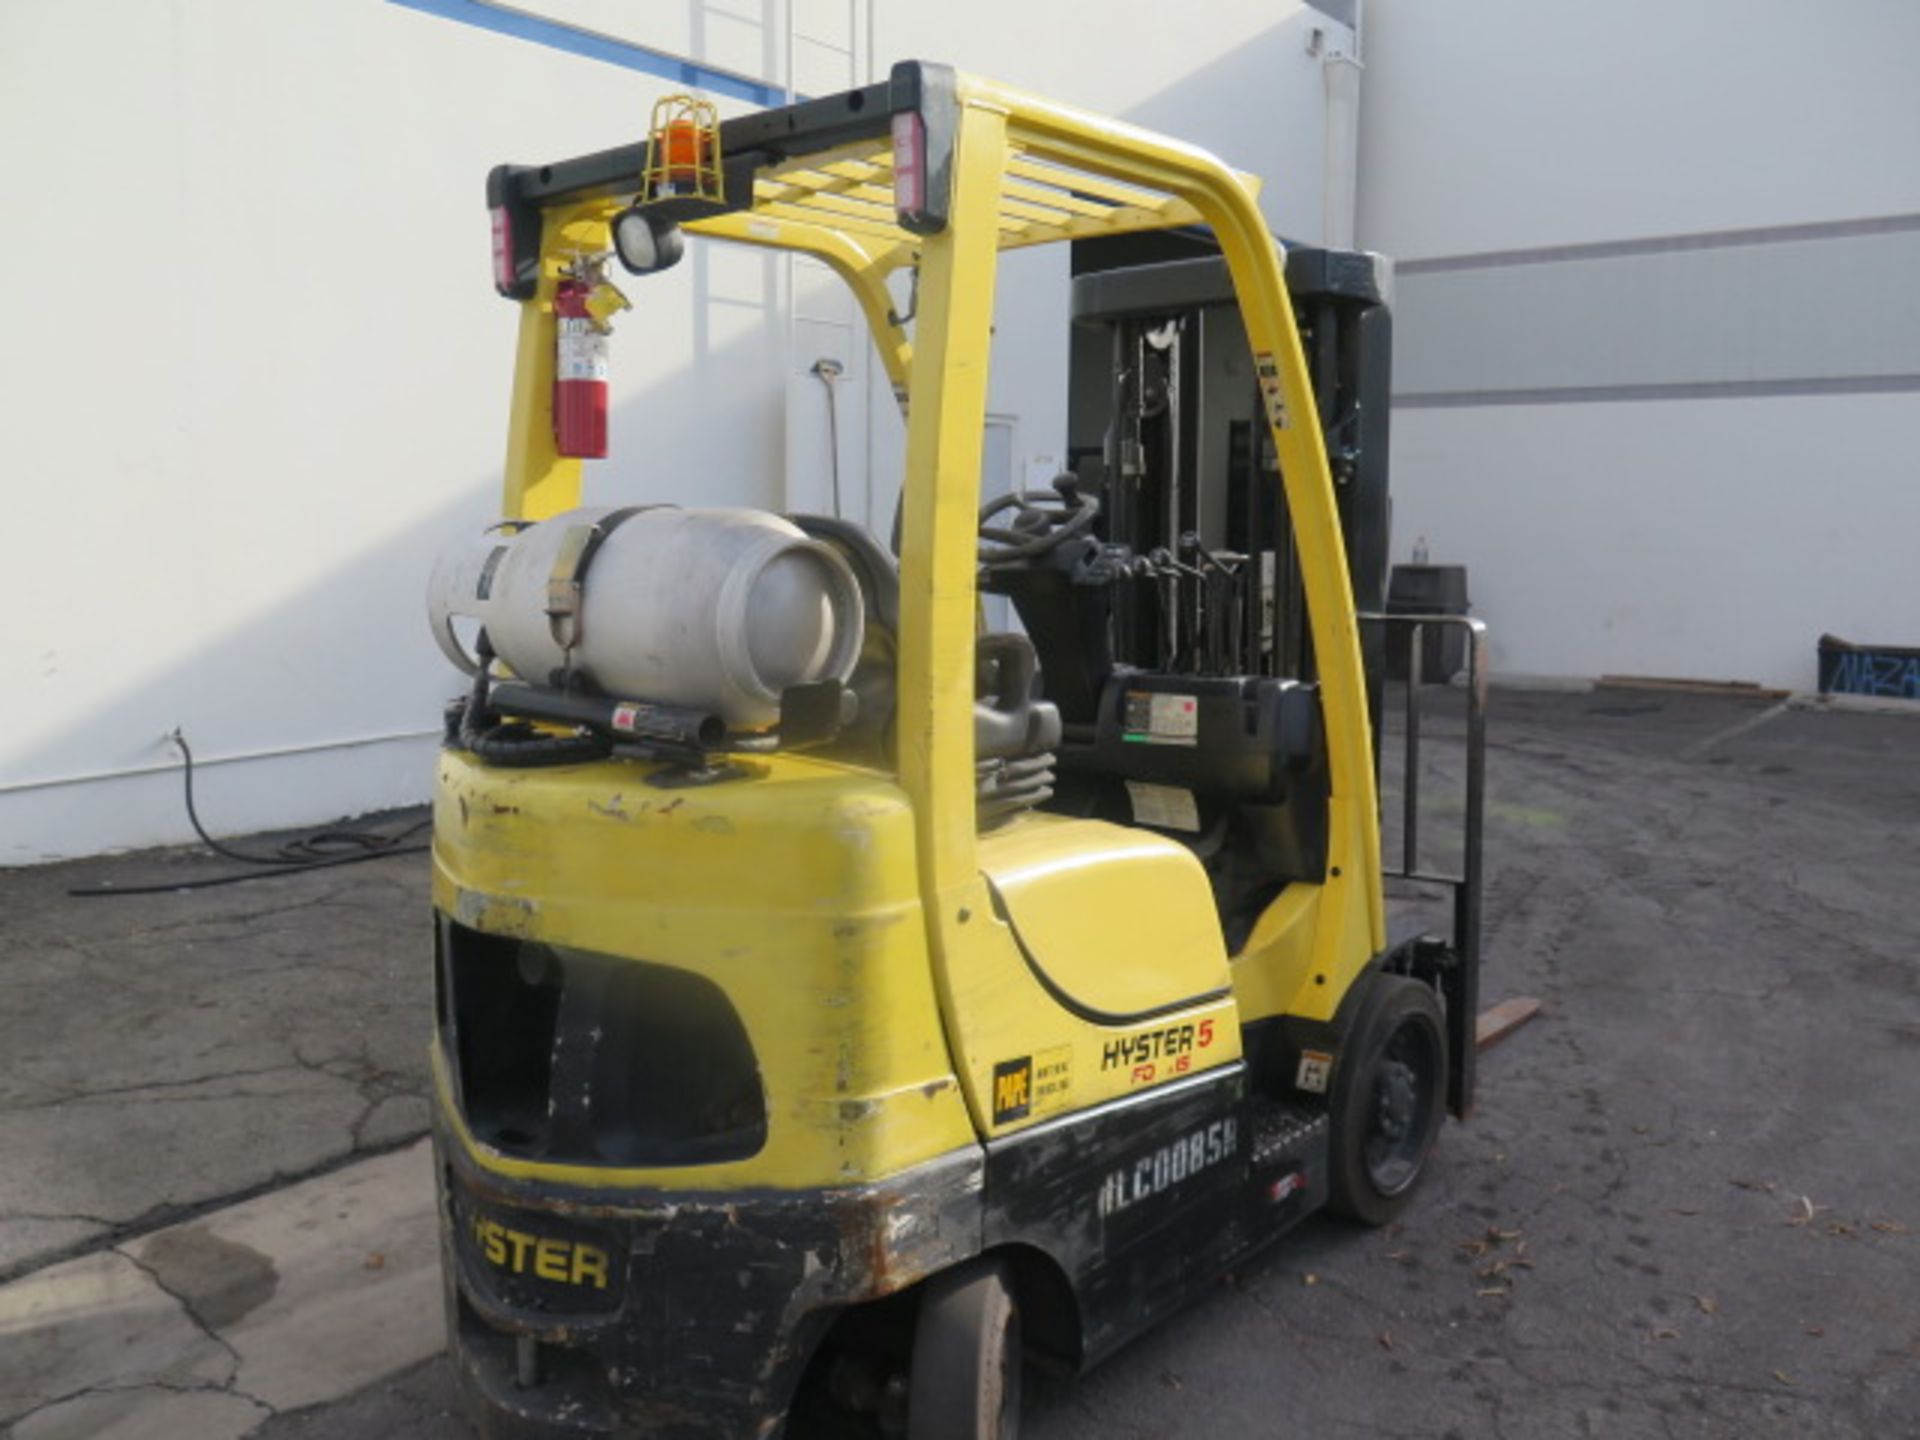 2016 Hyster S50FT 5000 Lb Cap LPG Forklift s/n H187V05054P, 3-Stage Mast, 189” Lift, SOLD AS IS - Image 3 of 19